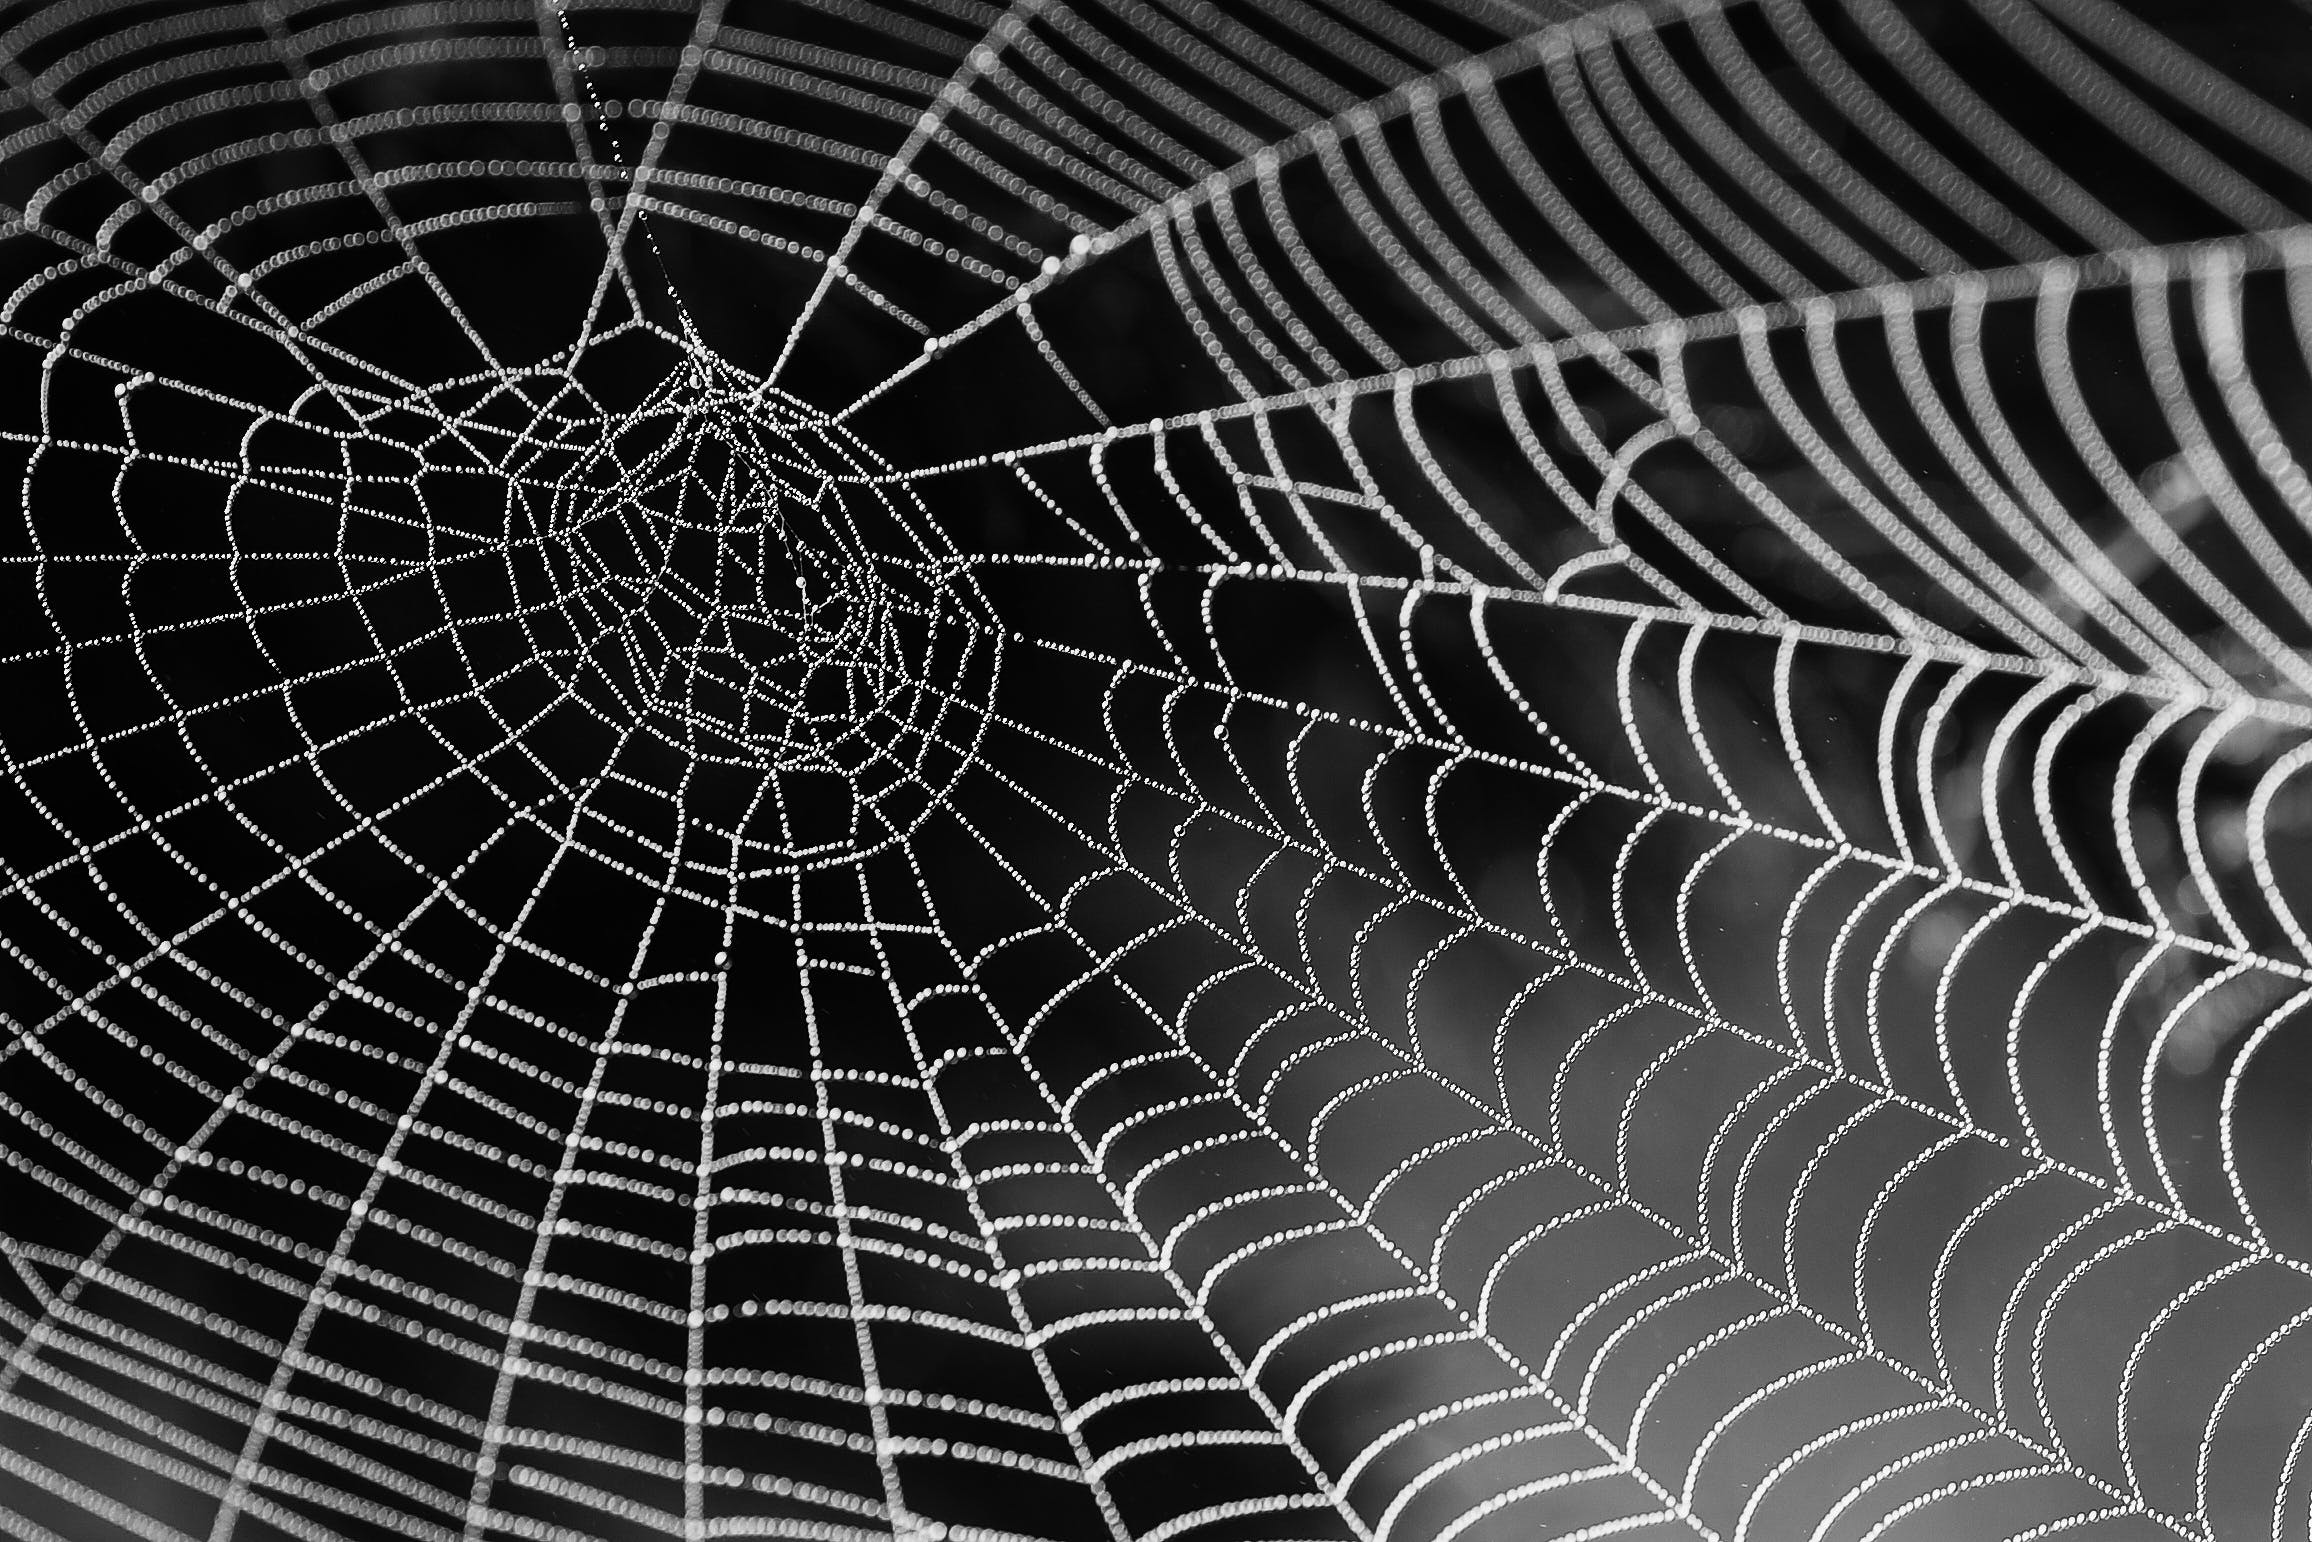 FBI exposes Scattered Spider's alliance with notorious ransomware gang